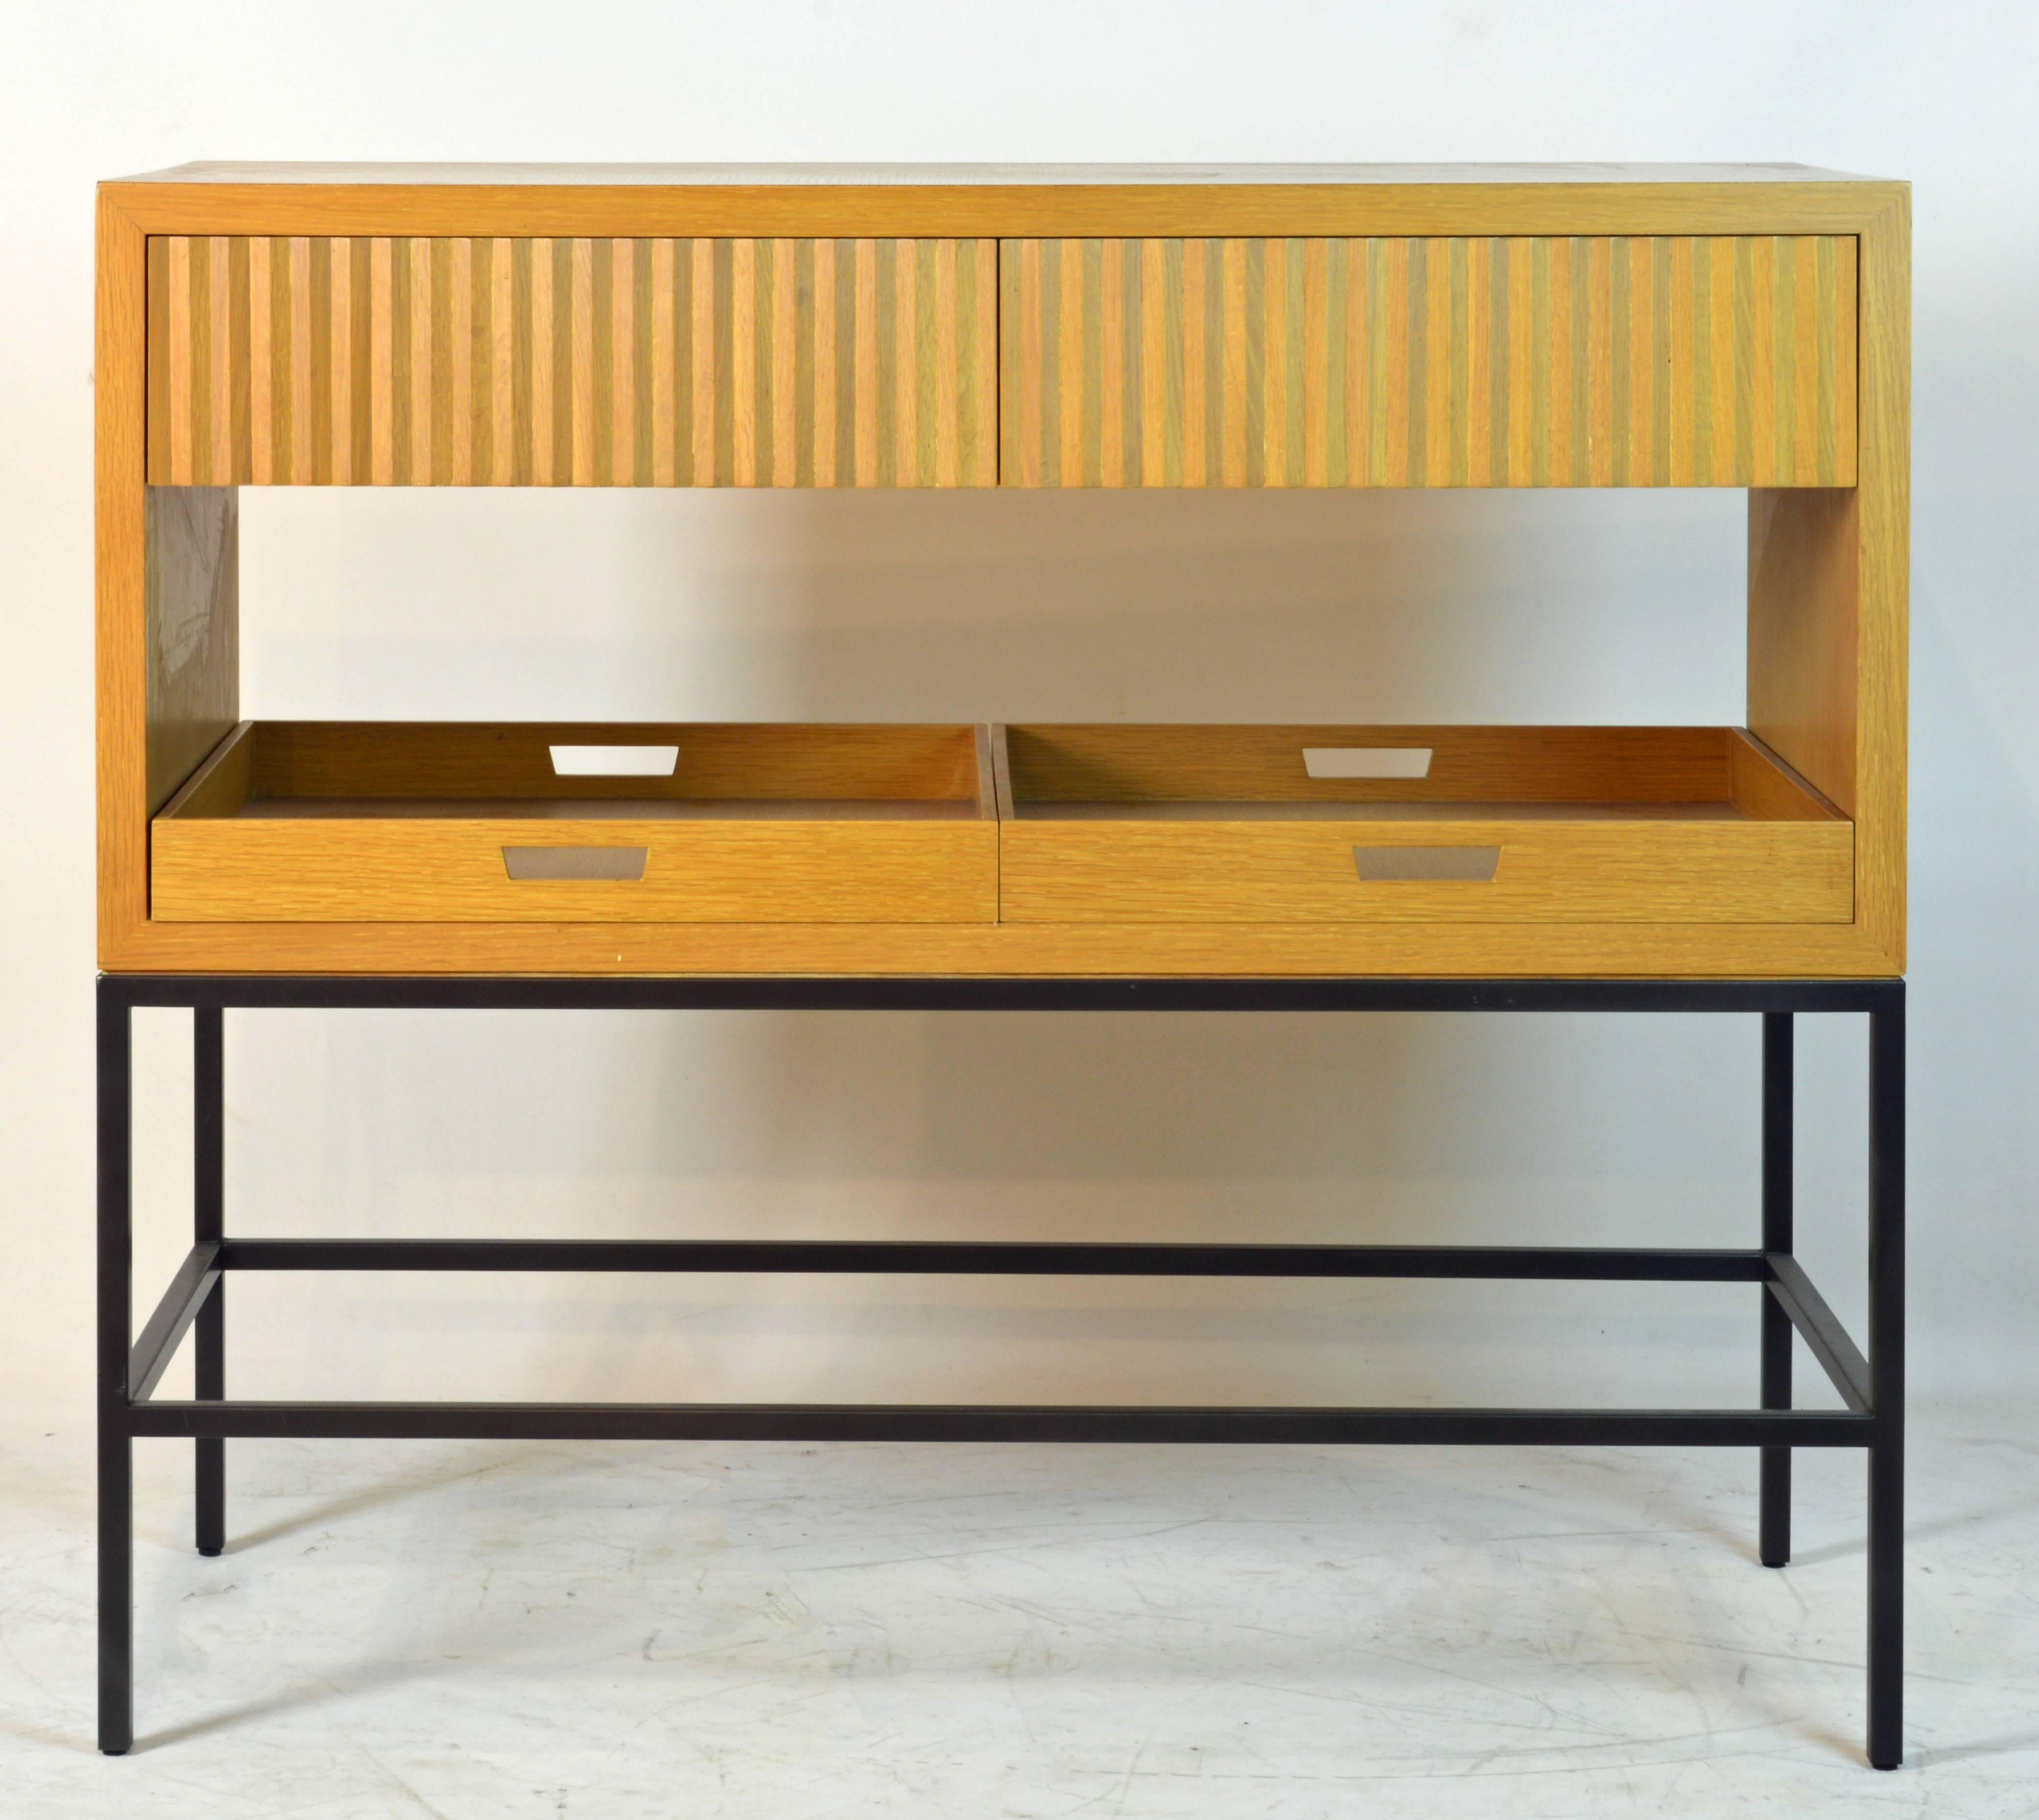 Lacquered Modern Design Bar or Credenza by Michael Vanderbyl for Bolier